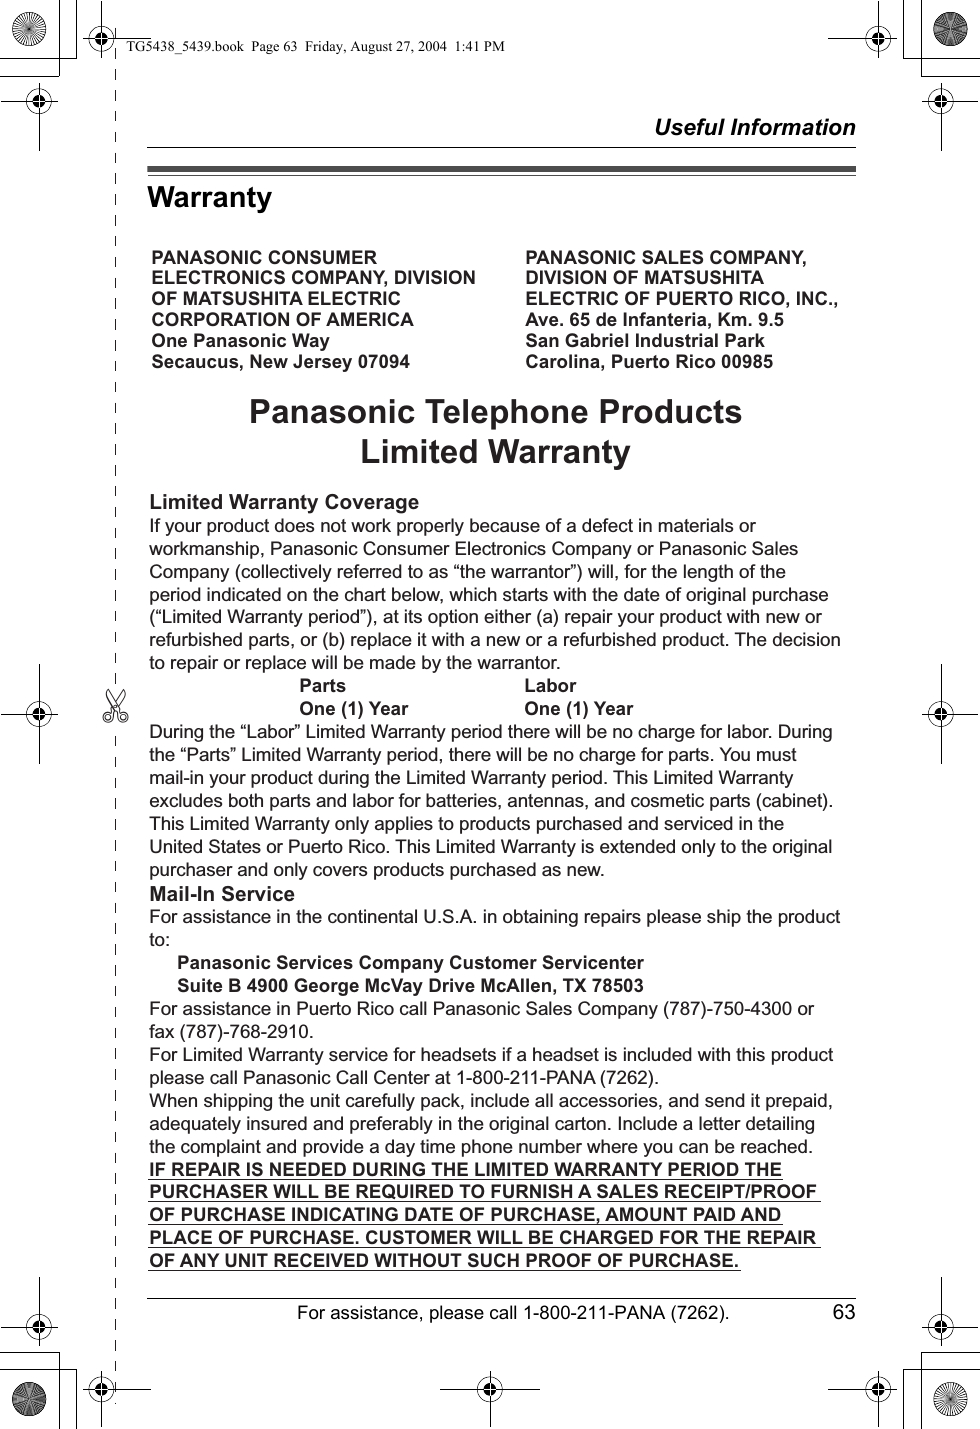 ✄Useful InformationFor assistance, please call 1-800-211-PANA (7262). 63WarrantyPANASONIC CONSUMER ELECTRONICS COMPANY, DIVISION OF MATSUSHITA ELECTRIC CORPORATION OF AMERICA One Panasonic Way Secaucus, New Jersey 07094PANASONIC SALES COMPANY, DIVISION OF MATSUSHITA ELECTRIC OF PUERTO RICO, INC., Ave. 65 de Infanteria, Km. 9.5 San Gabriel Industrial Park Carolina, Puerto Rico 00985Panasonic Telephone ProductsLimited WarrantyLimited Warranty CoverageIf your product does not work properly because of a defect in materials or workmanship, Panasonic Consumer Electronics Company or Panasonic Sales Company (collectively referred to as “the warrantor”) will, for the length of the period indicated on the chart below, which starts with the date of original purchase (“Limited Warranty period”), at its option either (a) repair your product with new or refurbished parts, or (b) replace it with a new or a refurbished product. The decision to repair or replace will be made by the warrantor.     Parts    Labor     One (1) Year    One (1) YearDuring the “Labor” Limited Warranty period there will be no charge for labor. During the “Parts” Limited Warranty period, there will be no charge for parts. You must mail-in your product during the Limited Warranty period. This Limited Warranty excludes both parts and labor for batteries, antennas, and cosmetic parts (cabinet). This Limited Warranty only applies to products purchased and serviced in the United States or Puerto Rico. This Limited Warranty is extended only to the original purchaser and only covers products purchased as new.Mail-In ServiceFor assistance in the continental U.S.A. in obtaining repairs please ship the product to:  Panasonic Services Company Customer Servicenter  Suite B 4900 George McVay Drive McAllen, TX 78503For assistance in Puerto Rico call Panasonic Sales Company (787)-750-4300 or fax (787)-768-2910.For Limited Warranty service for headsets if a headset is included with this product please call Panasonic Call Center at 1-800-211-PANA (7262).When shipping the unit carefully pack, include all accessories, and send it prepaid, adequately insured and preferably in the original carton. Include a letter detailing the complaint and provide a day time phone number where you can be reached.IF REPAIR IS NEEDED DURING THE LIMITED WARRANTY PERIOD THE PURCHASER WILL BE REQUIRED TO FURNISH A SALES RECEIPT/PROOF OF PURCHASE INDICATING DATE OF PURCHASE, AMOUNT PAID AND PLACE OF PURCHASE. CUSTOMER WILL BE CHARGED FOR THE REPAIR OF ANY UNIT RECEIVED WITHOUT SUCH PROOF OF PURCHASE.TG5438_5439.book  Page 63  Friday, August 27, 2004  1:41 PM